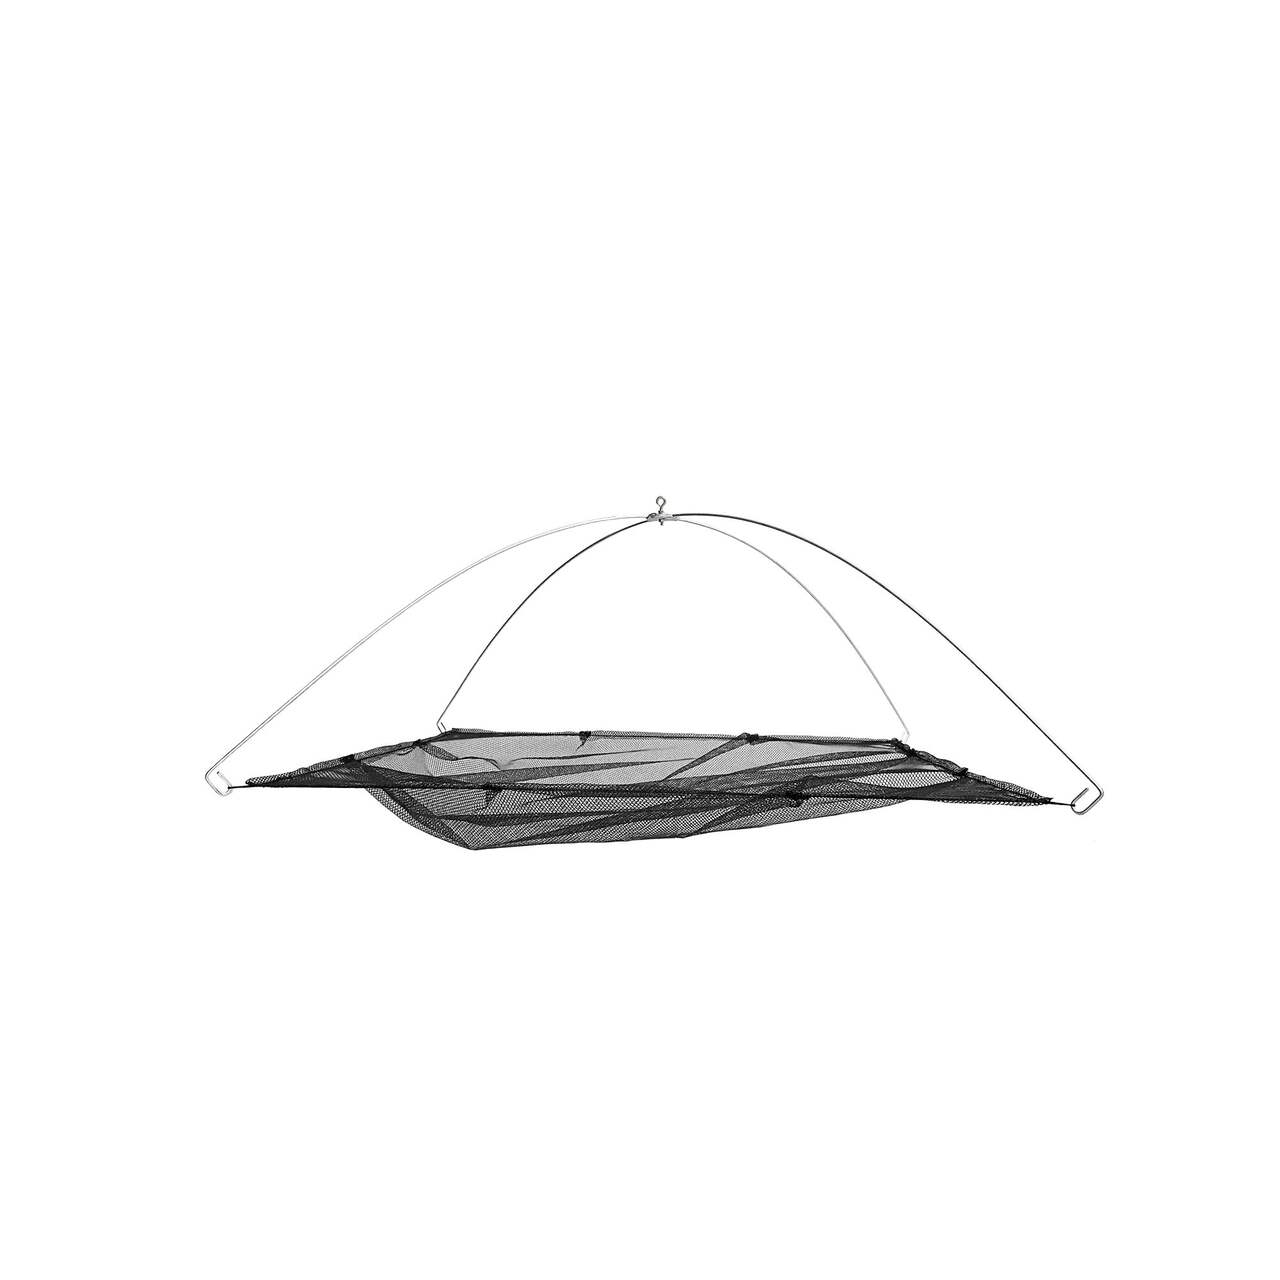 https://media-www.canadiantire.ca/product/playing/fishing/fishing-accessories/0775433/lucky-strike-umbrella-net-40-x-40--2584d327-91ac-47d5-870e-922d06535b8e-jpgrendition.jpg?imdensity=1&imwidth=640&impolicy=mZoom